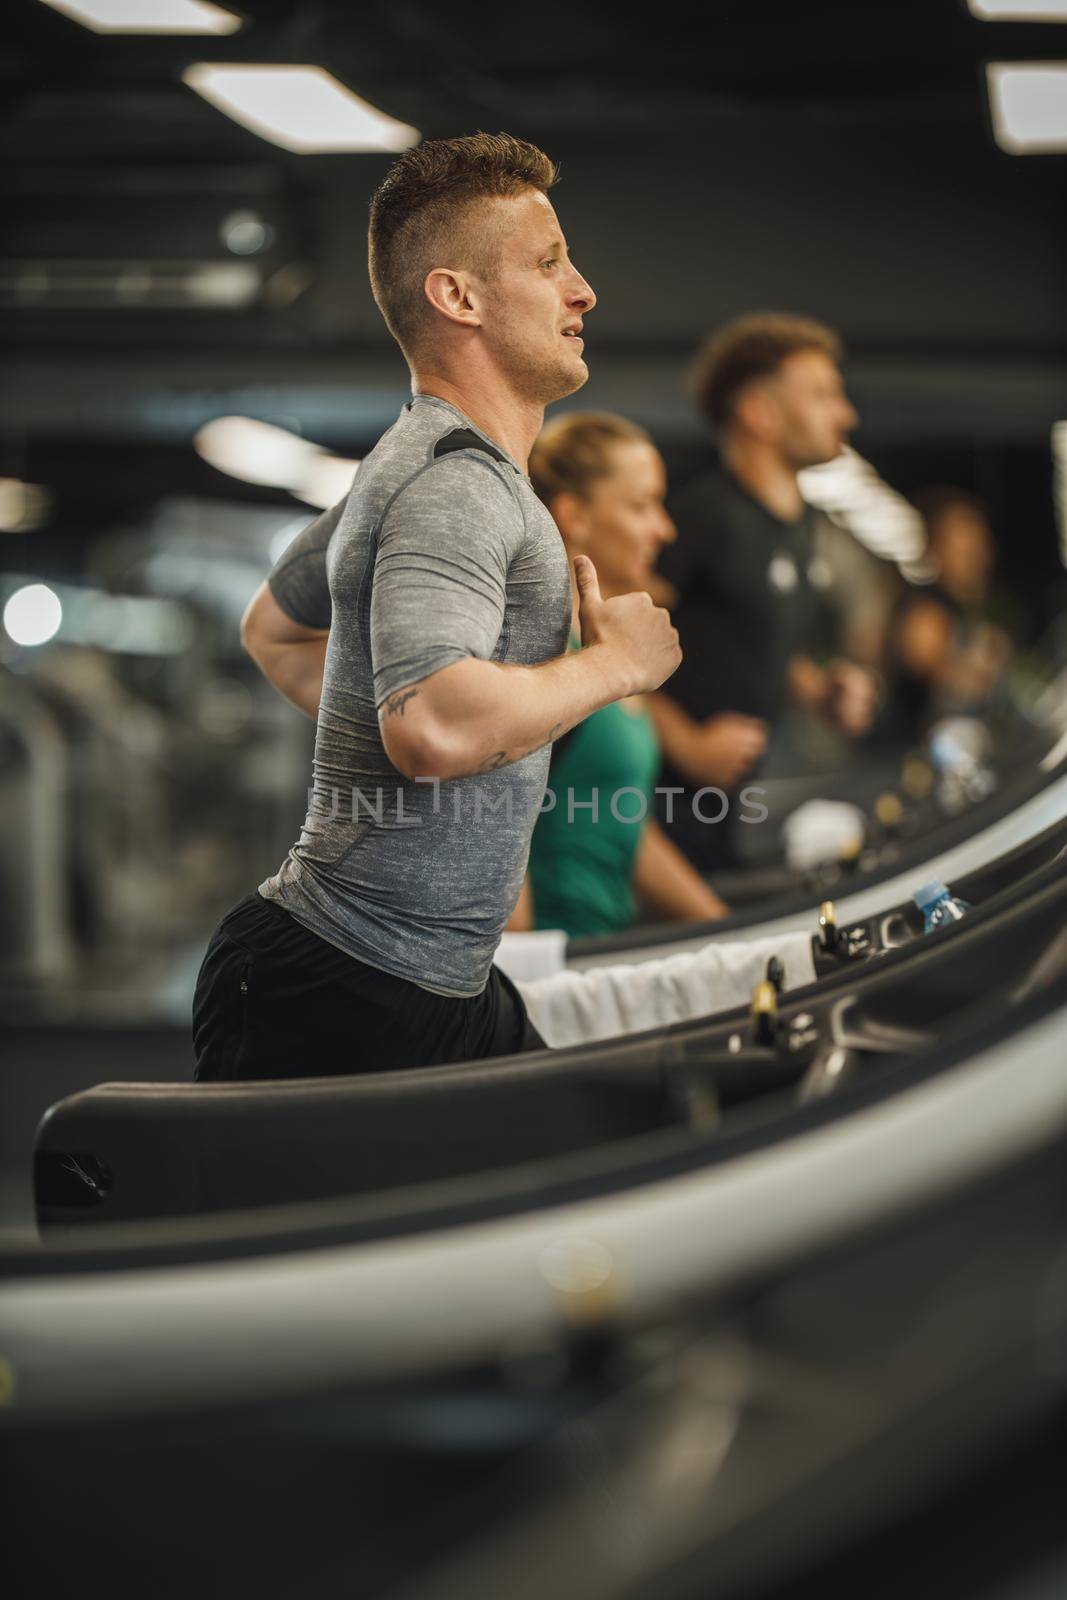 Shot of a young man jogging on a treadmill at the gym.